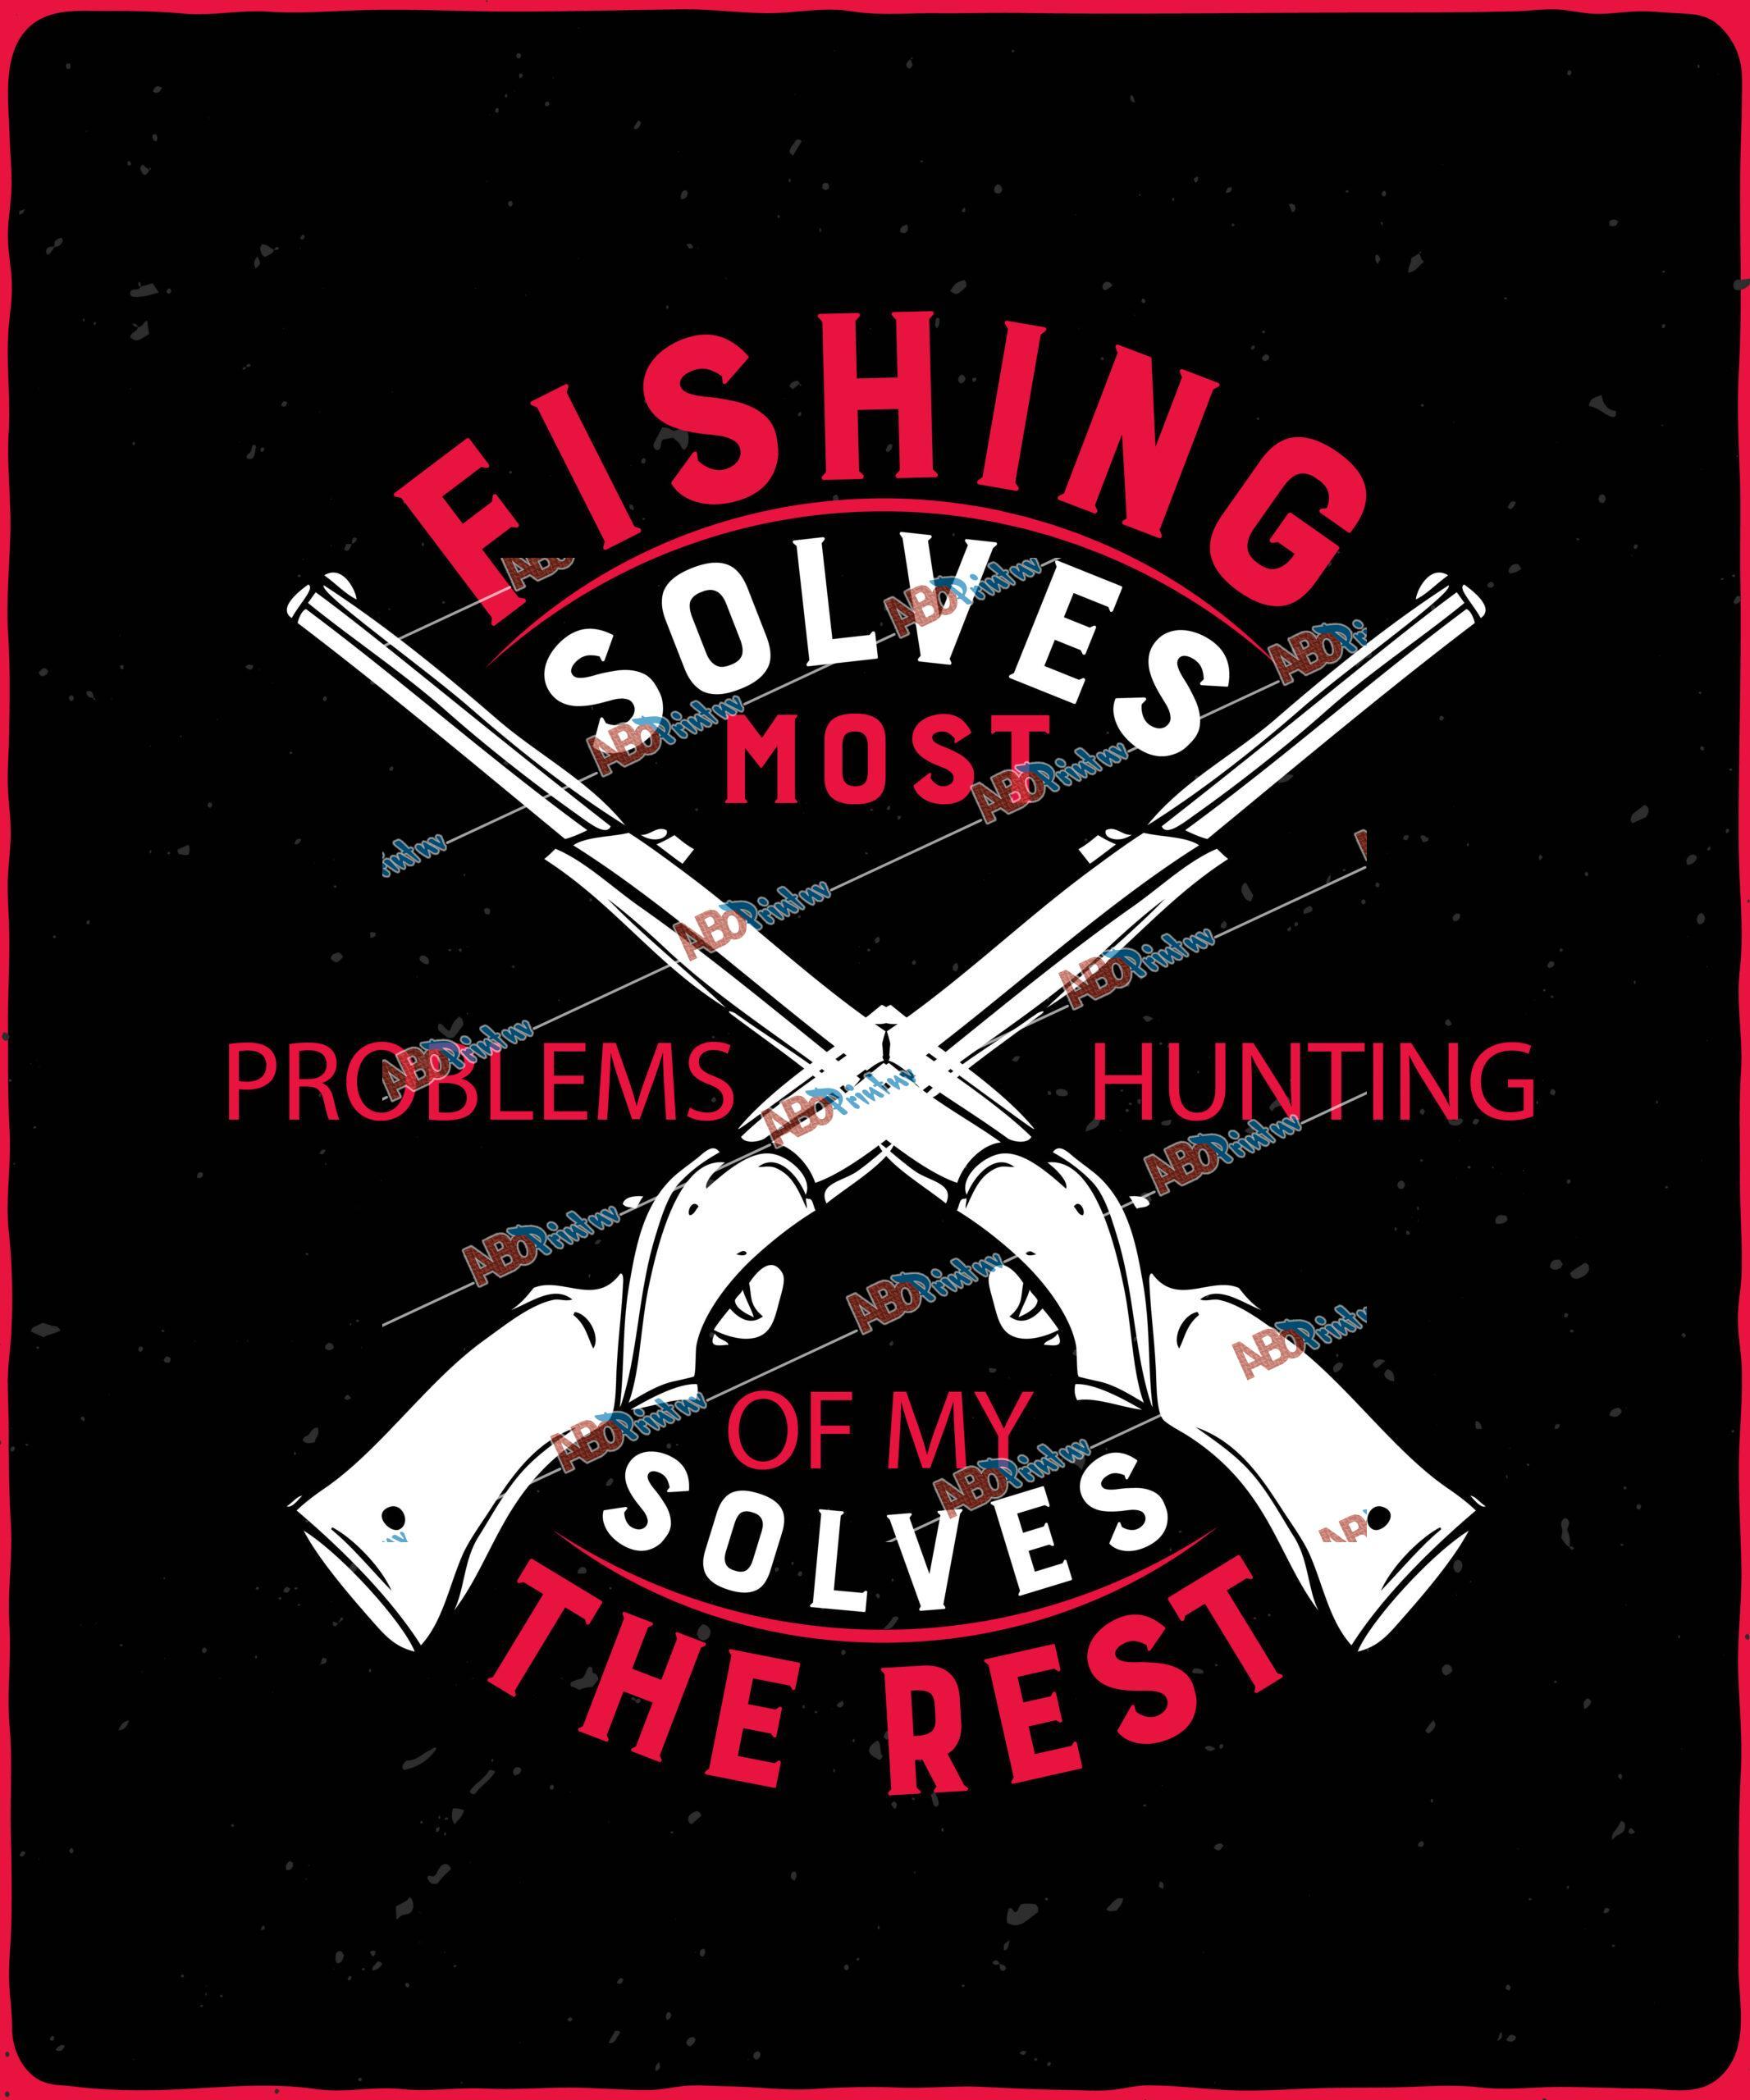 Fishing Solves Most